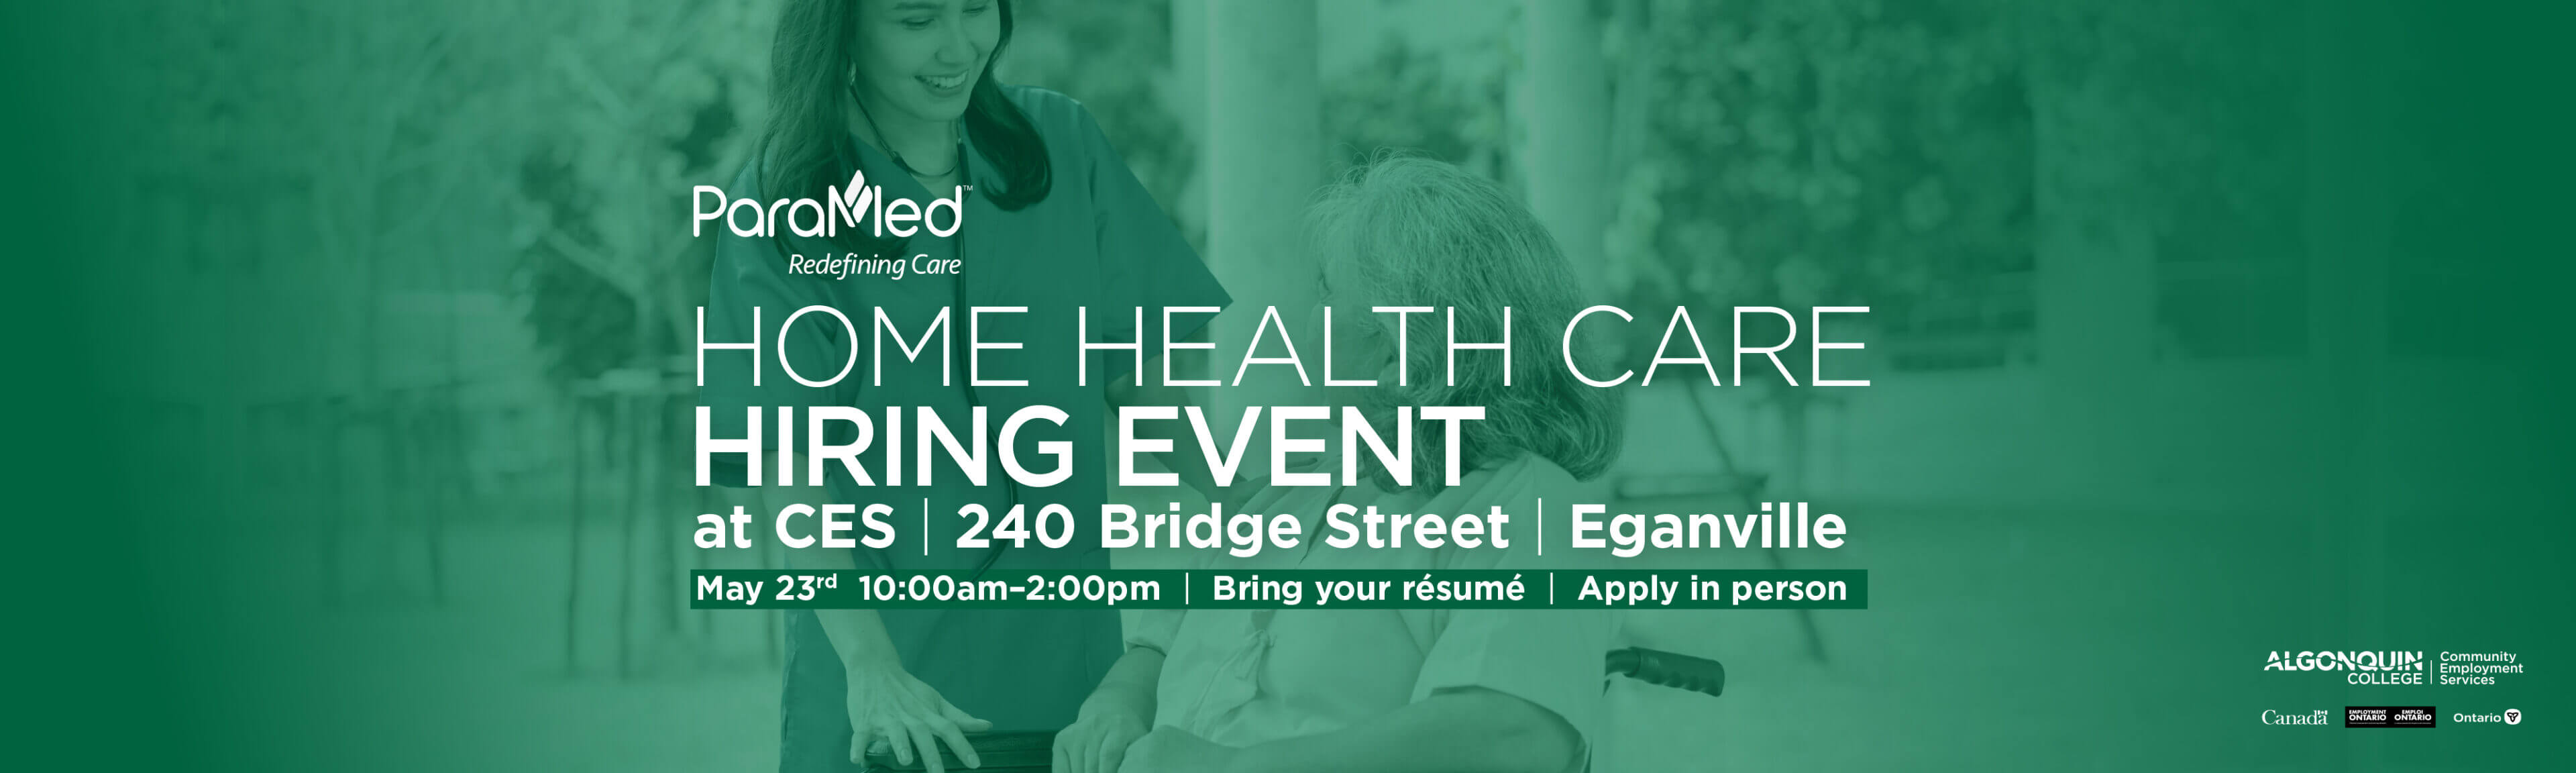 ParaMed Hiring Event May 23th Eganville